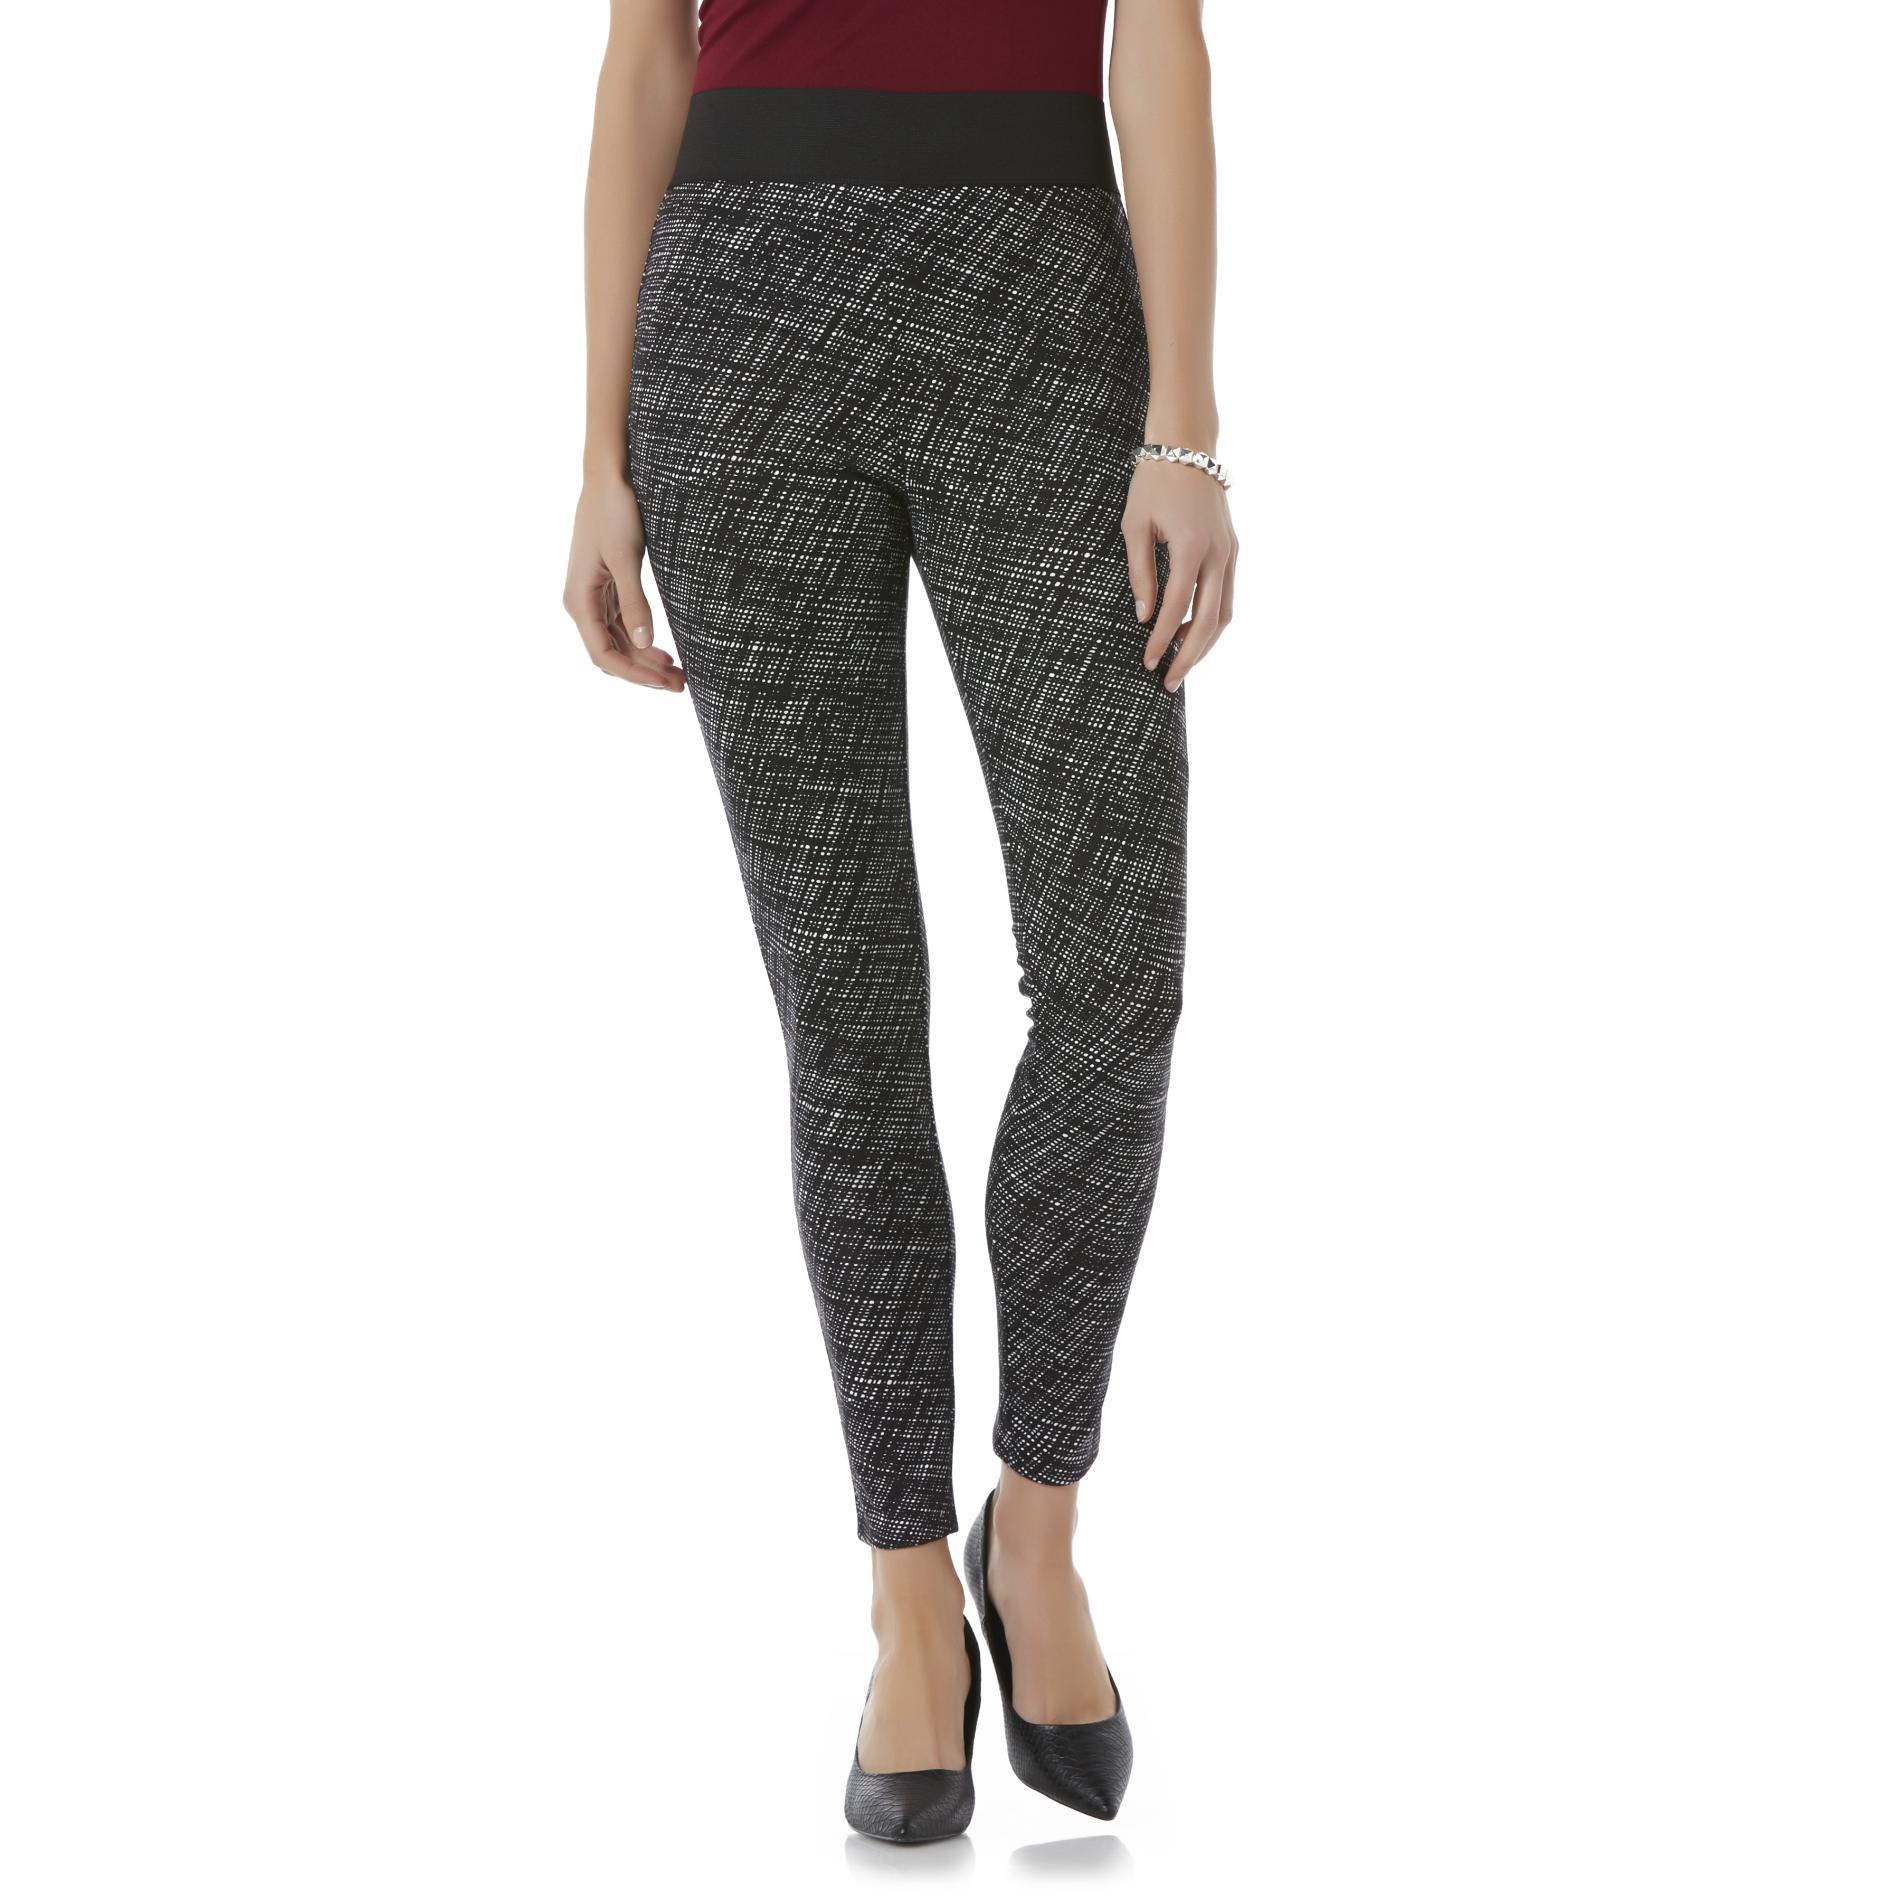 Metaphor Women's Stretch Fit Printed Pants - Abstract